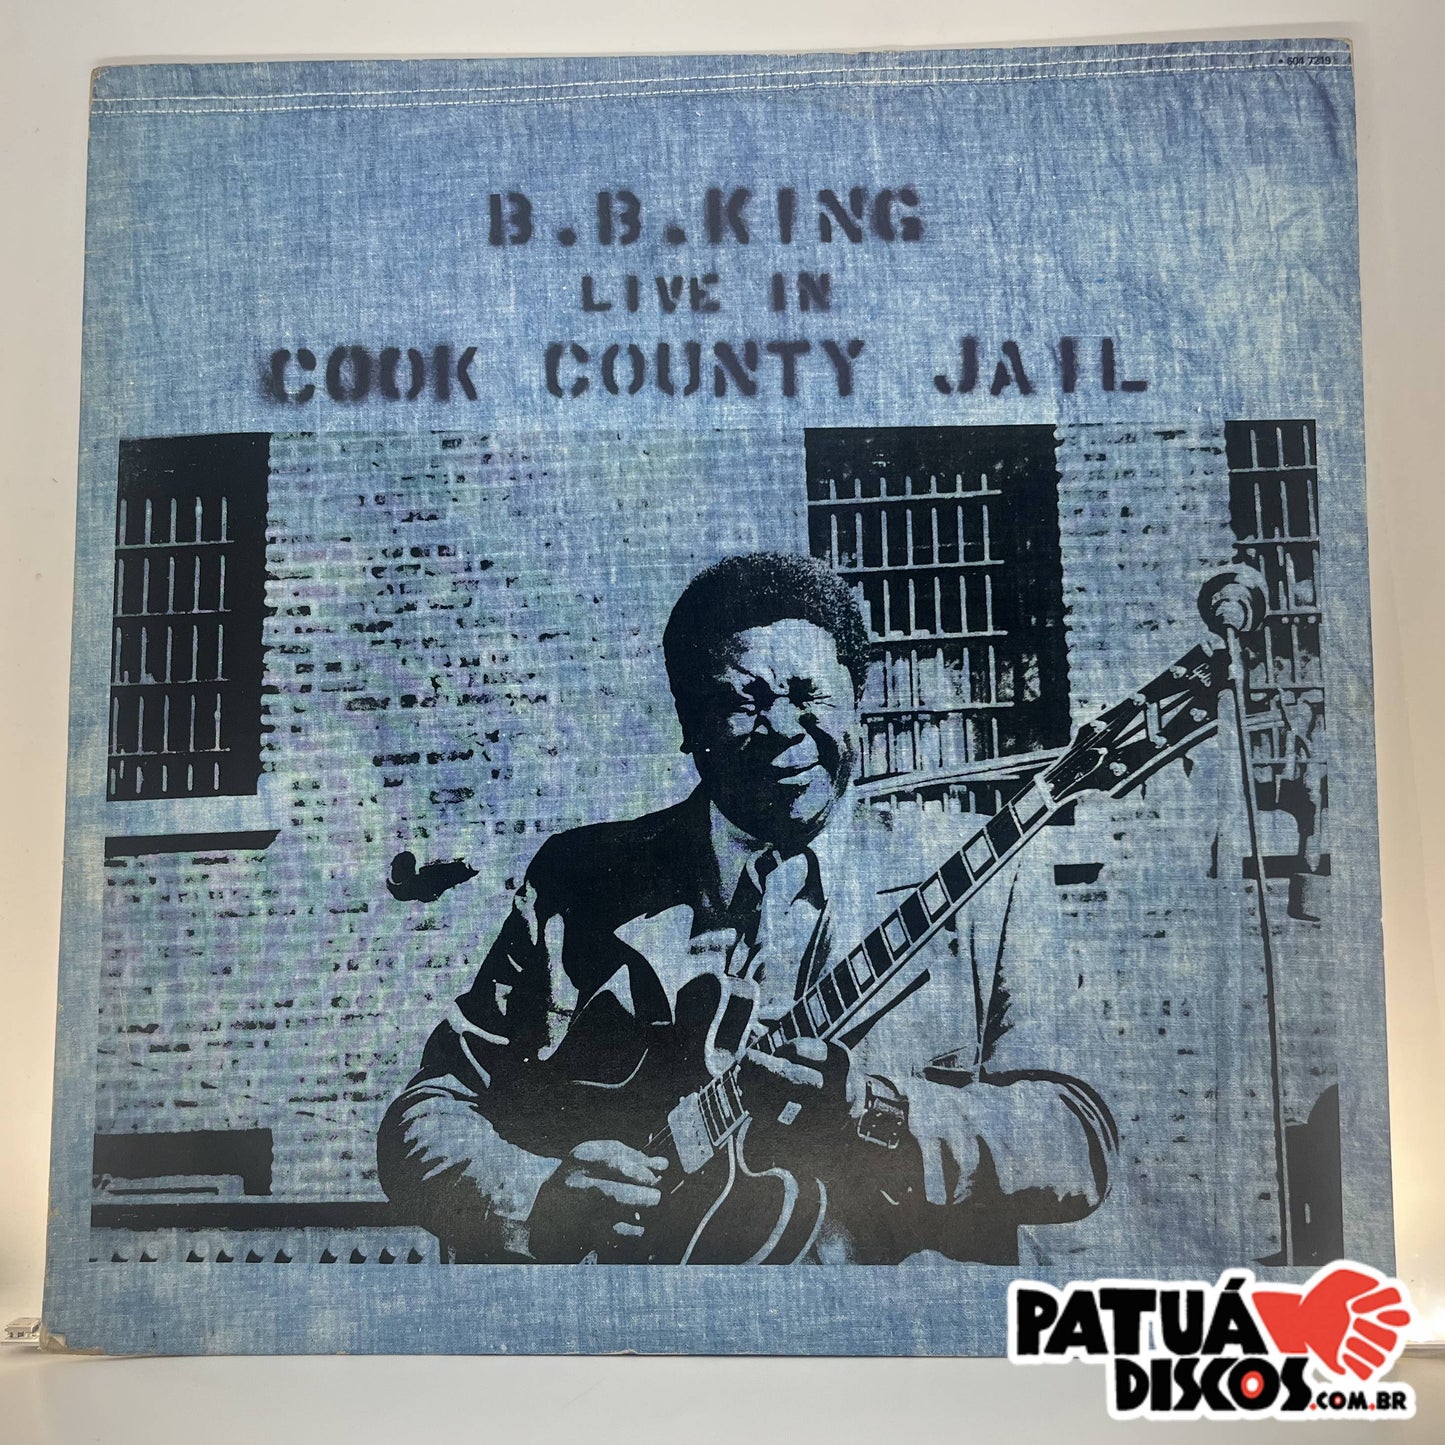 B.B. King - Live In Cook County Jail - LP